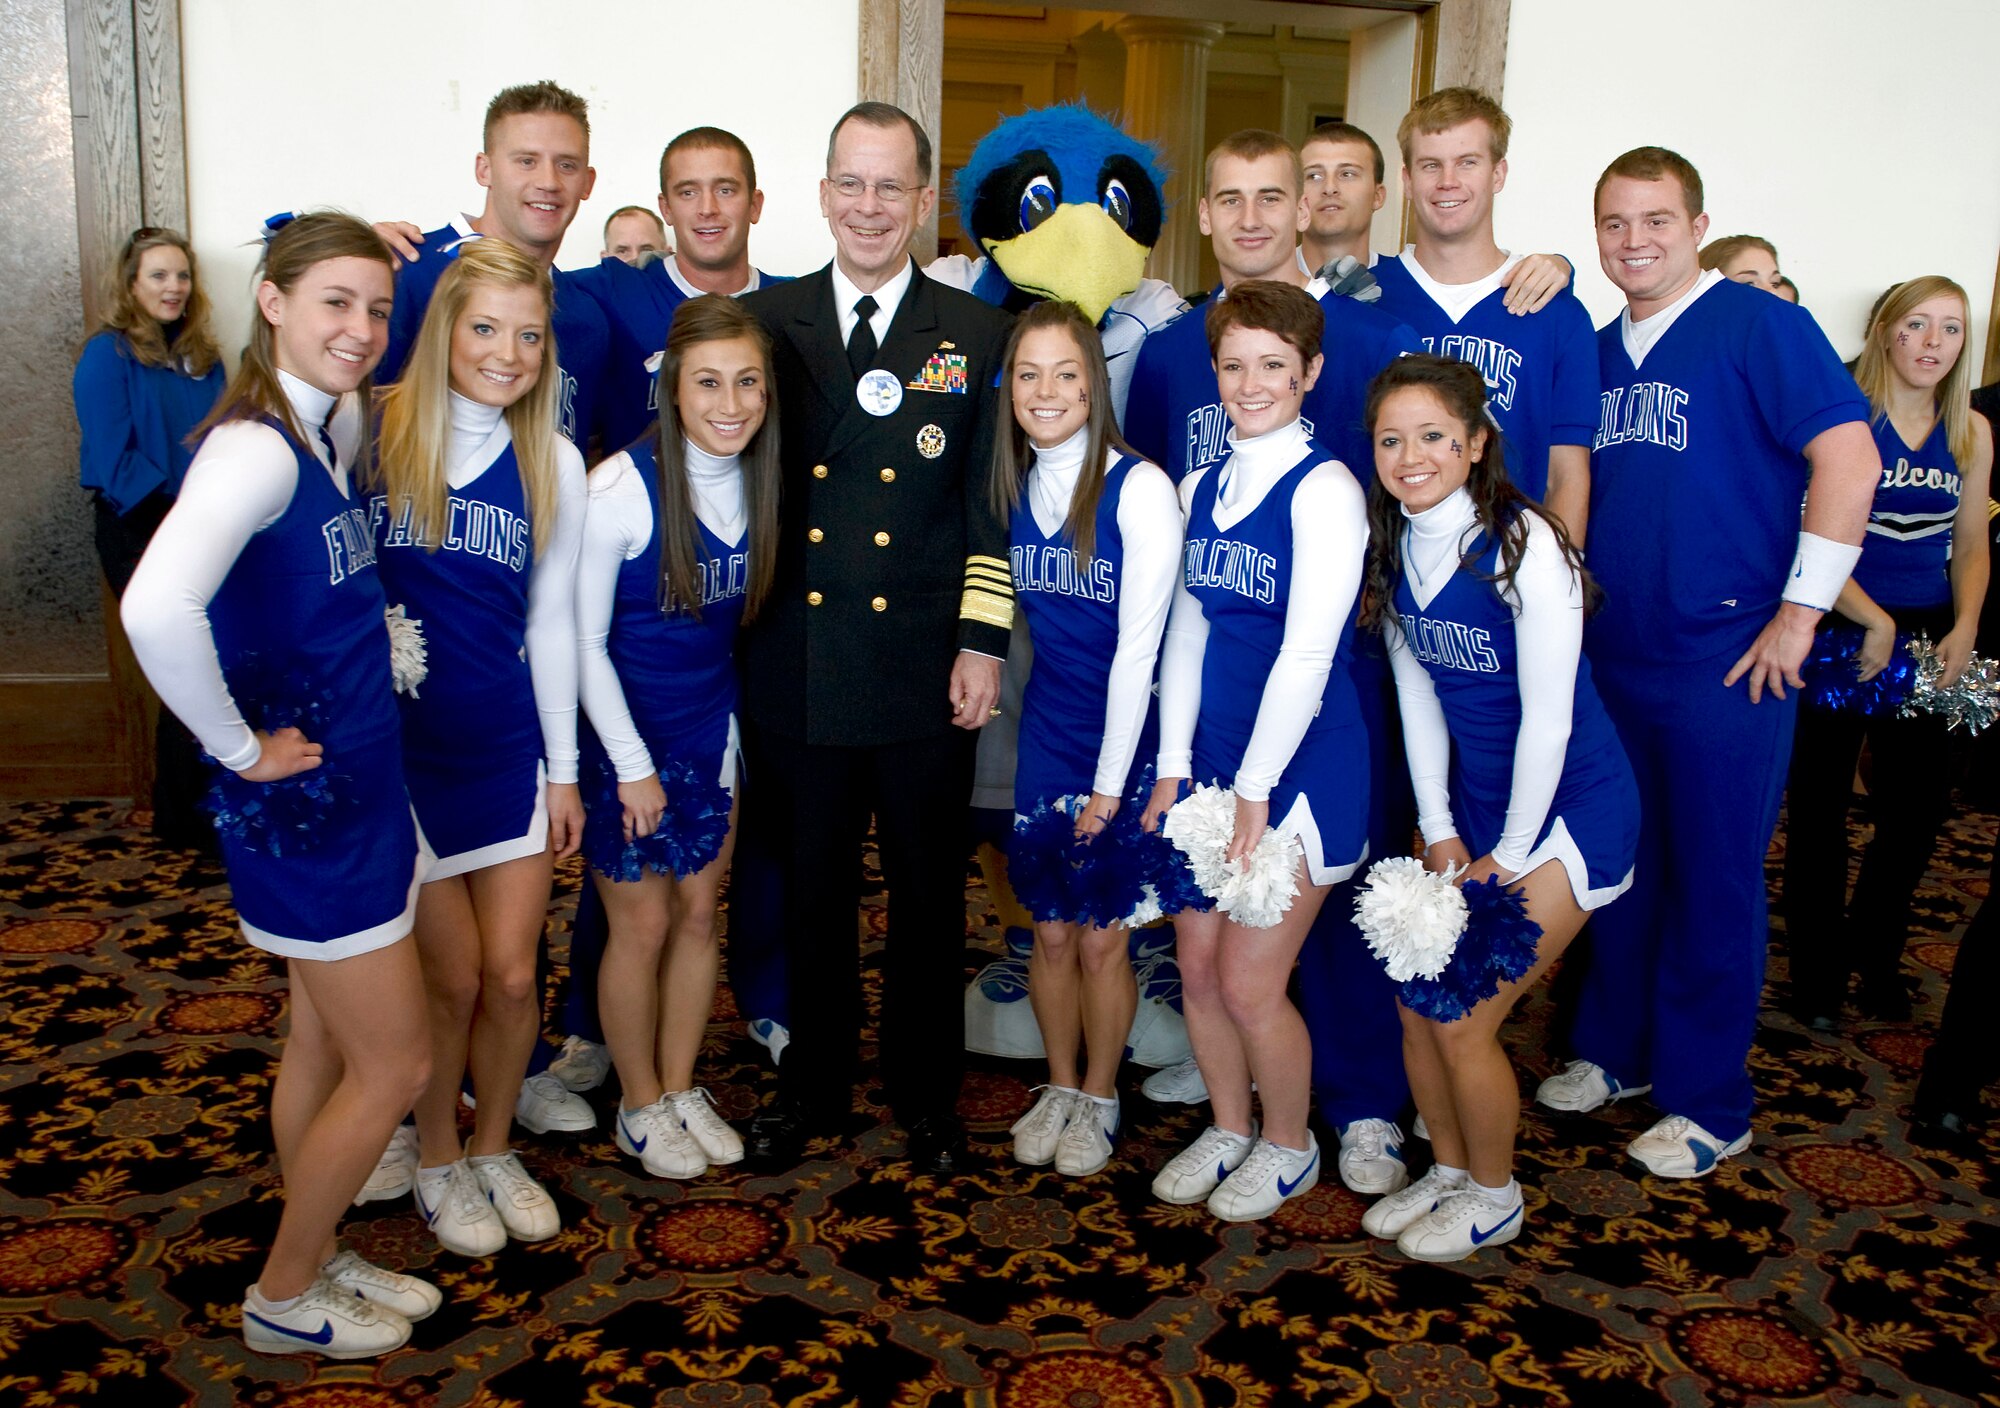 Navy Adm. Michael G. Mullen poses with the U.S. Air Force Academy cheerleaders at a tailgating party before the football game versus the U.S. Military Academy Black Knights Nov. 1 at West Point, N.Y. Admiral Mullen is the chairman of the Joint Chiefs of Staff. (Defense Department photo/Navy Petty Officer 1st Class Chad J. McNeeley)
